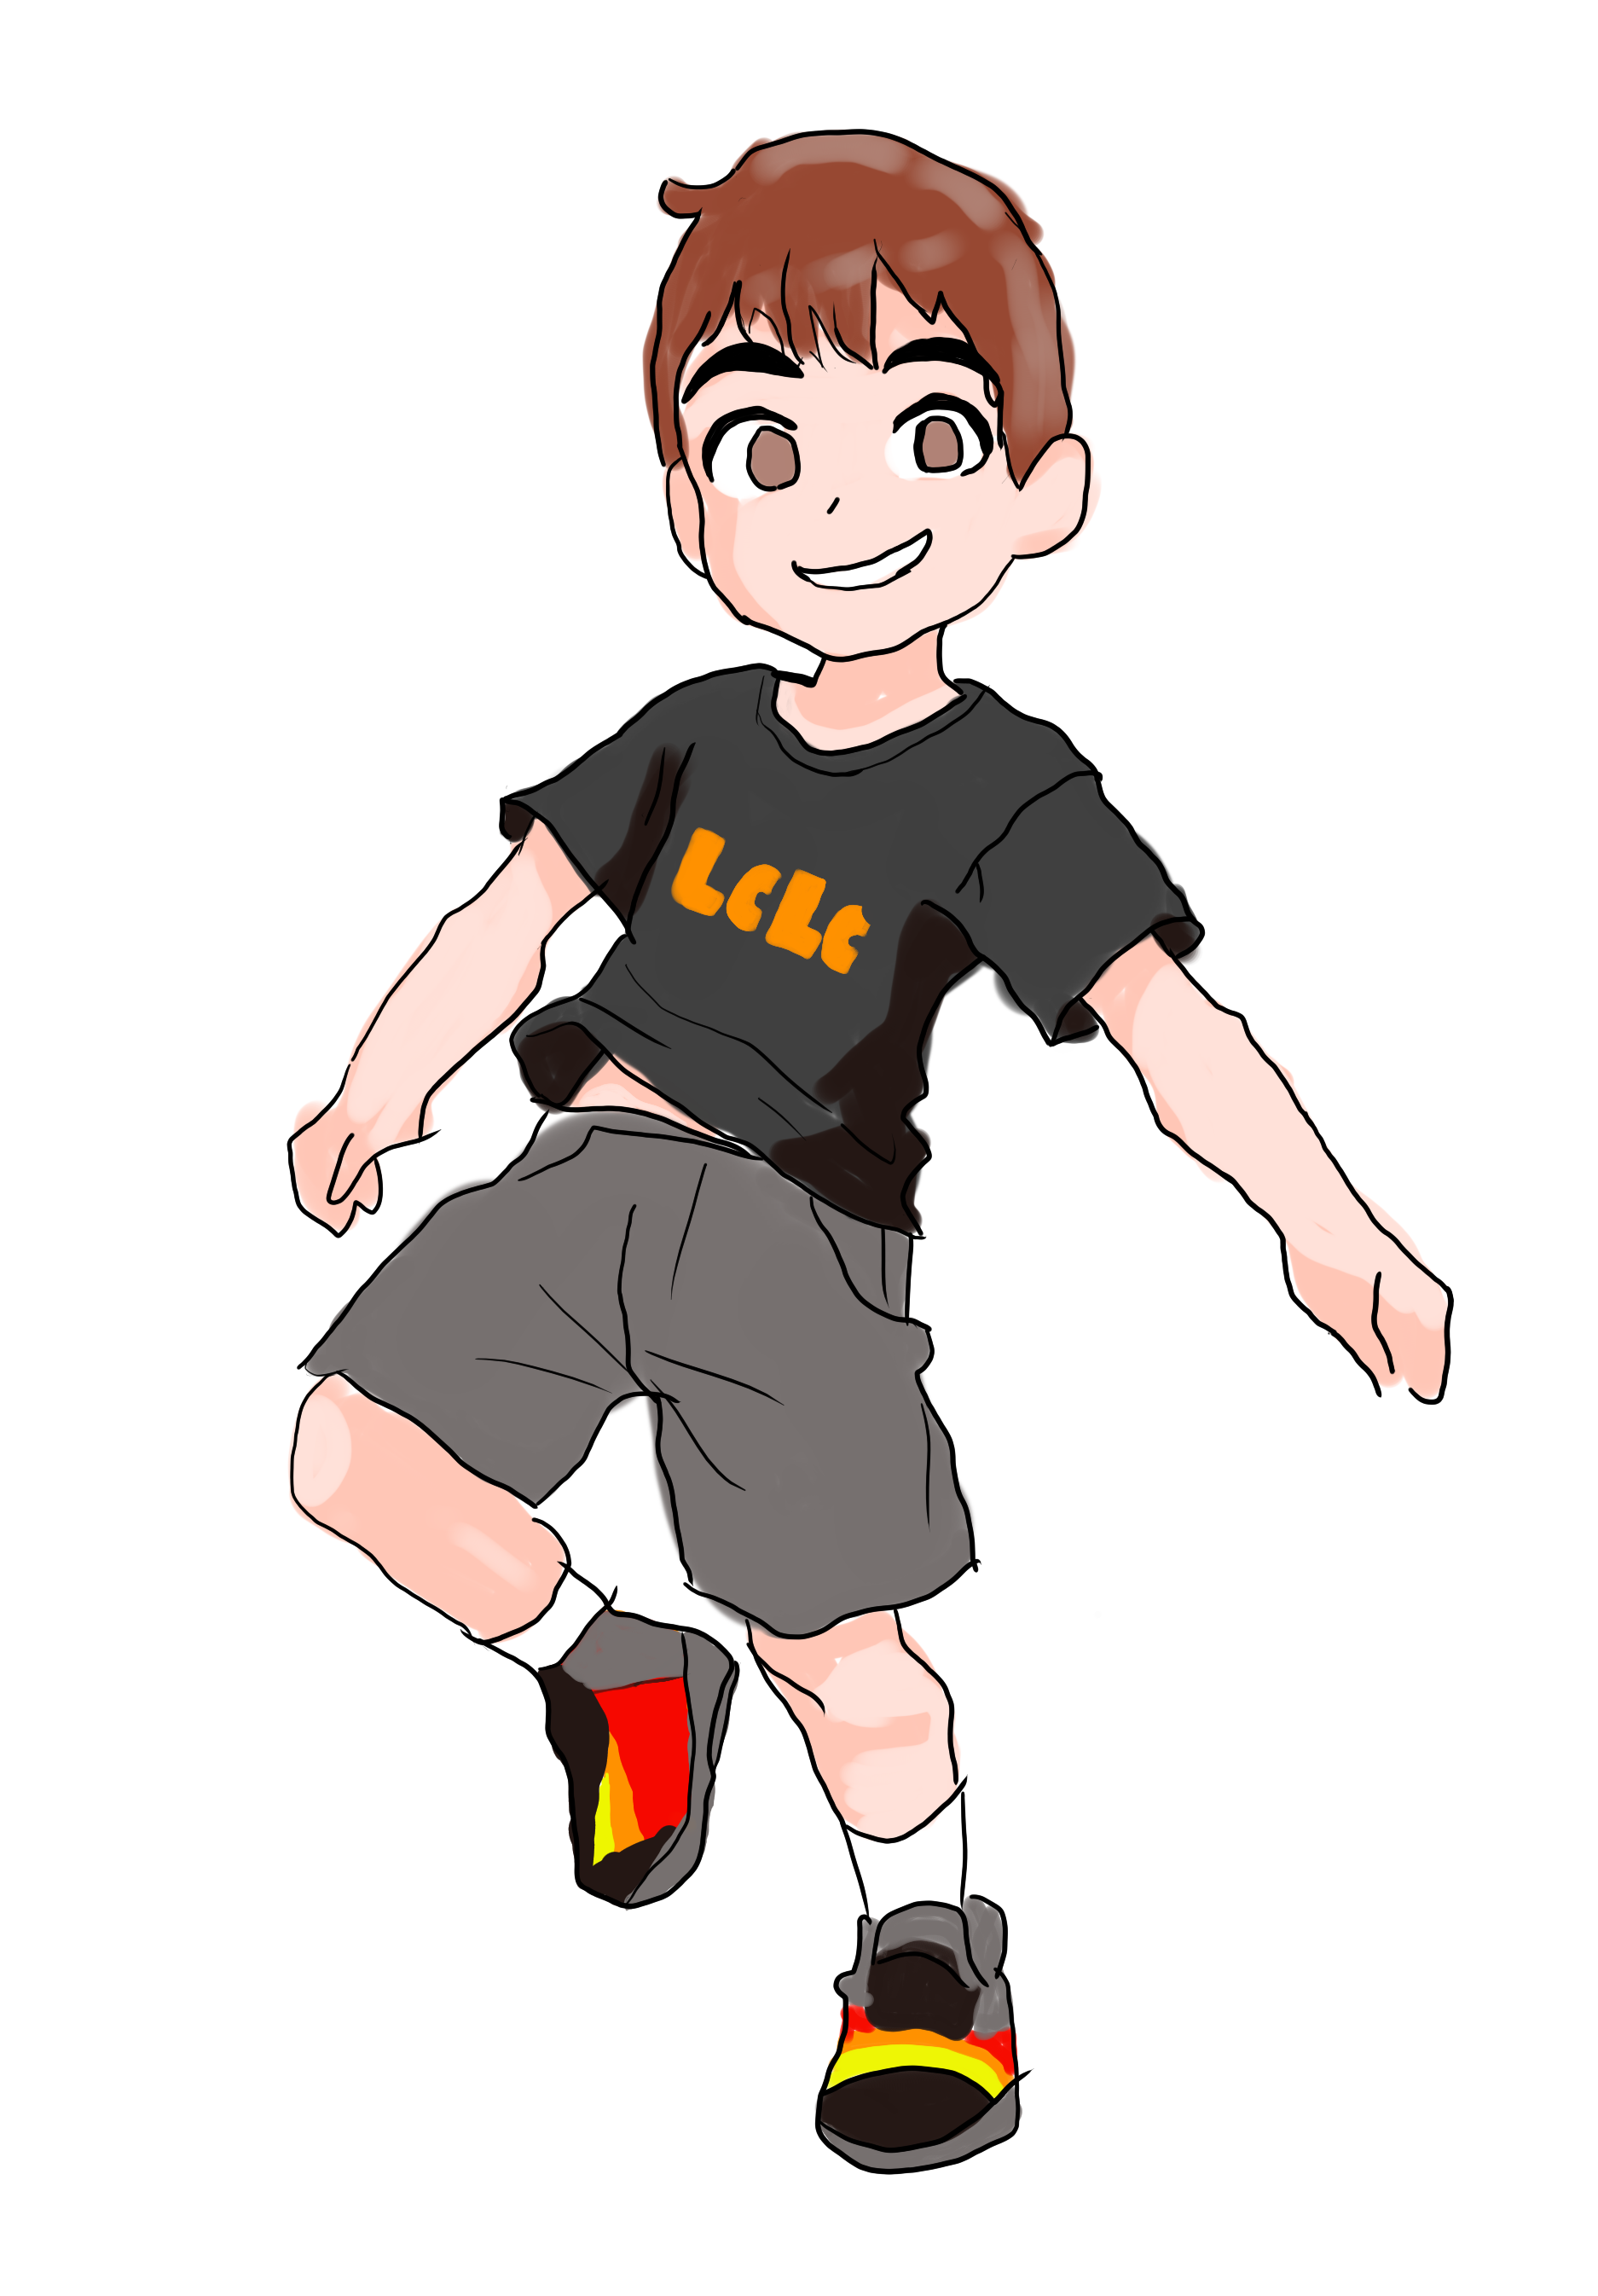 Illustration of a child wearing a black Tshirt